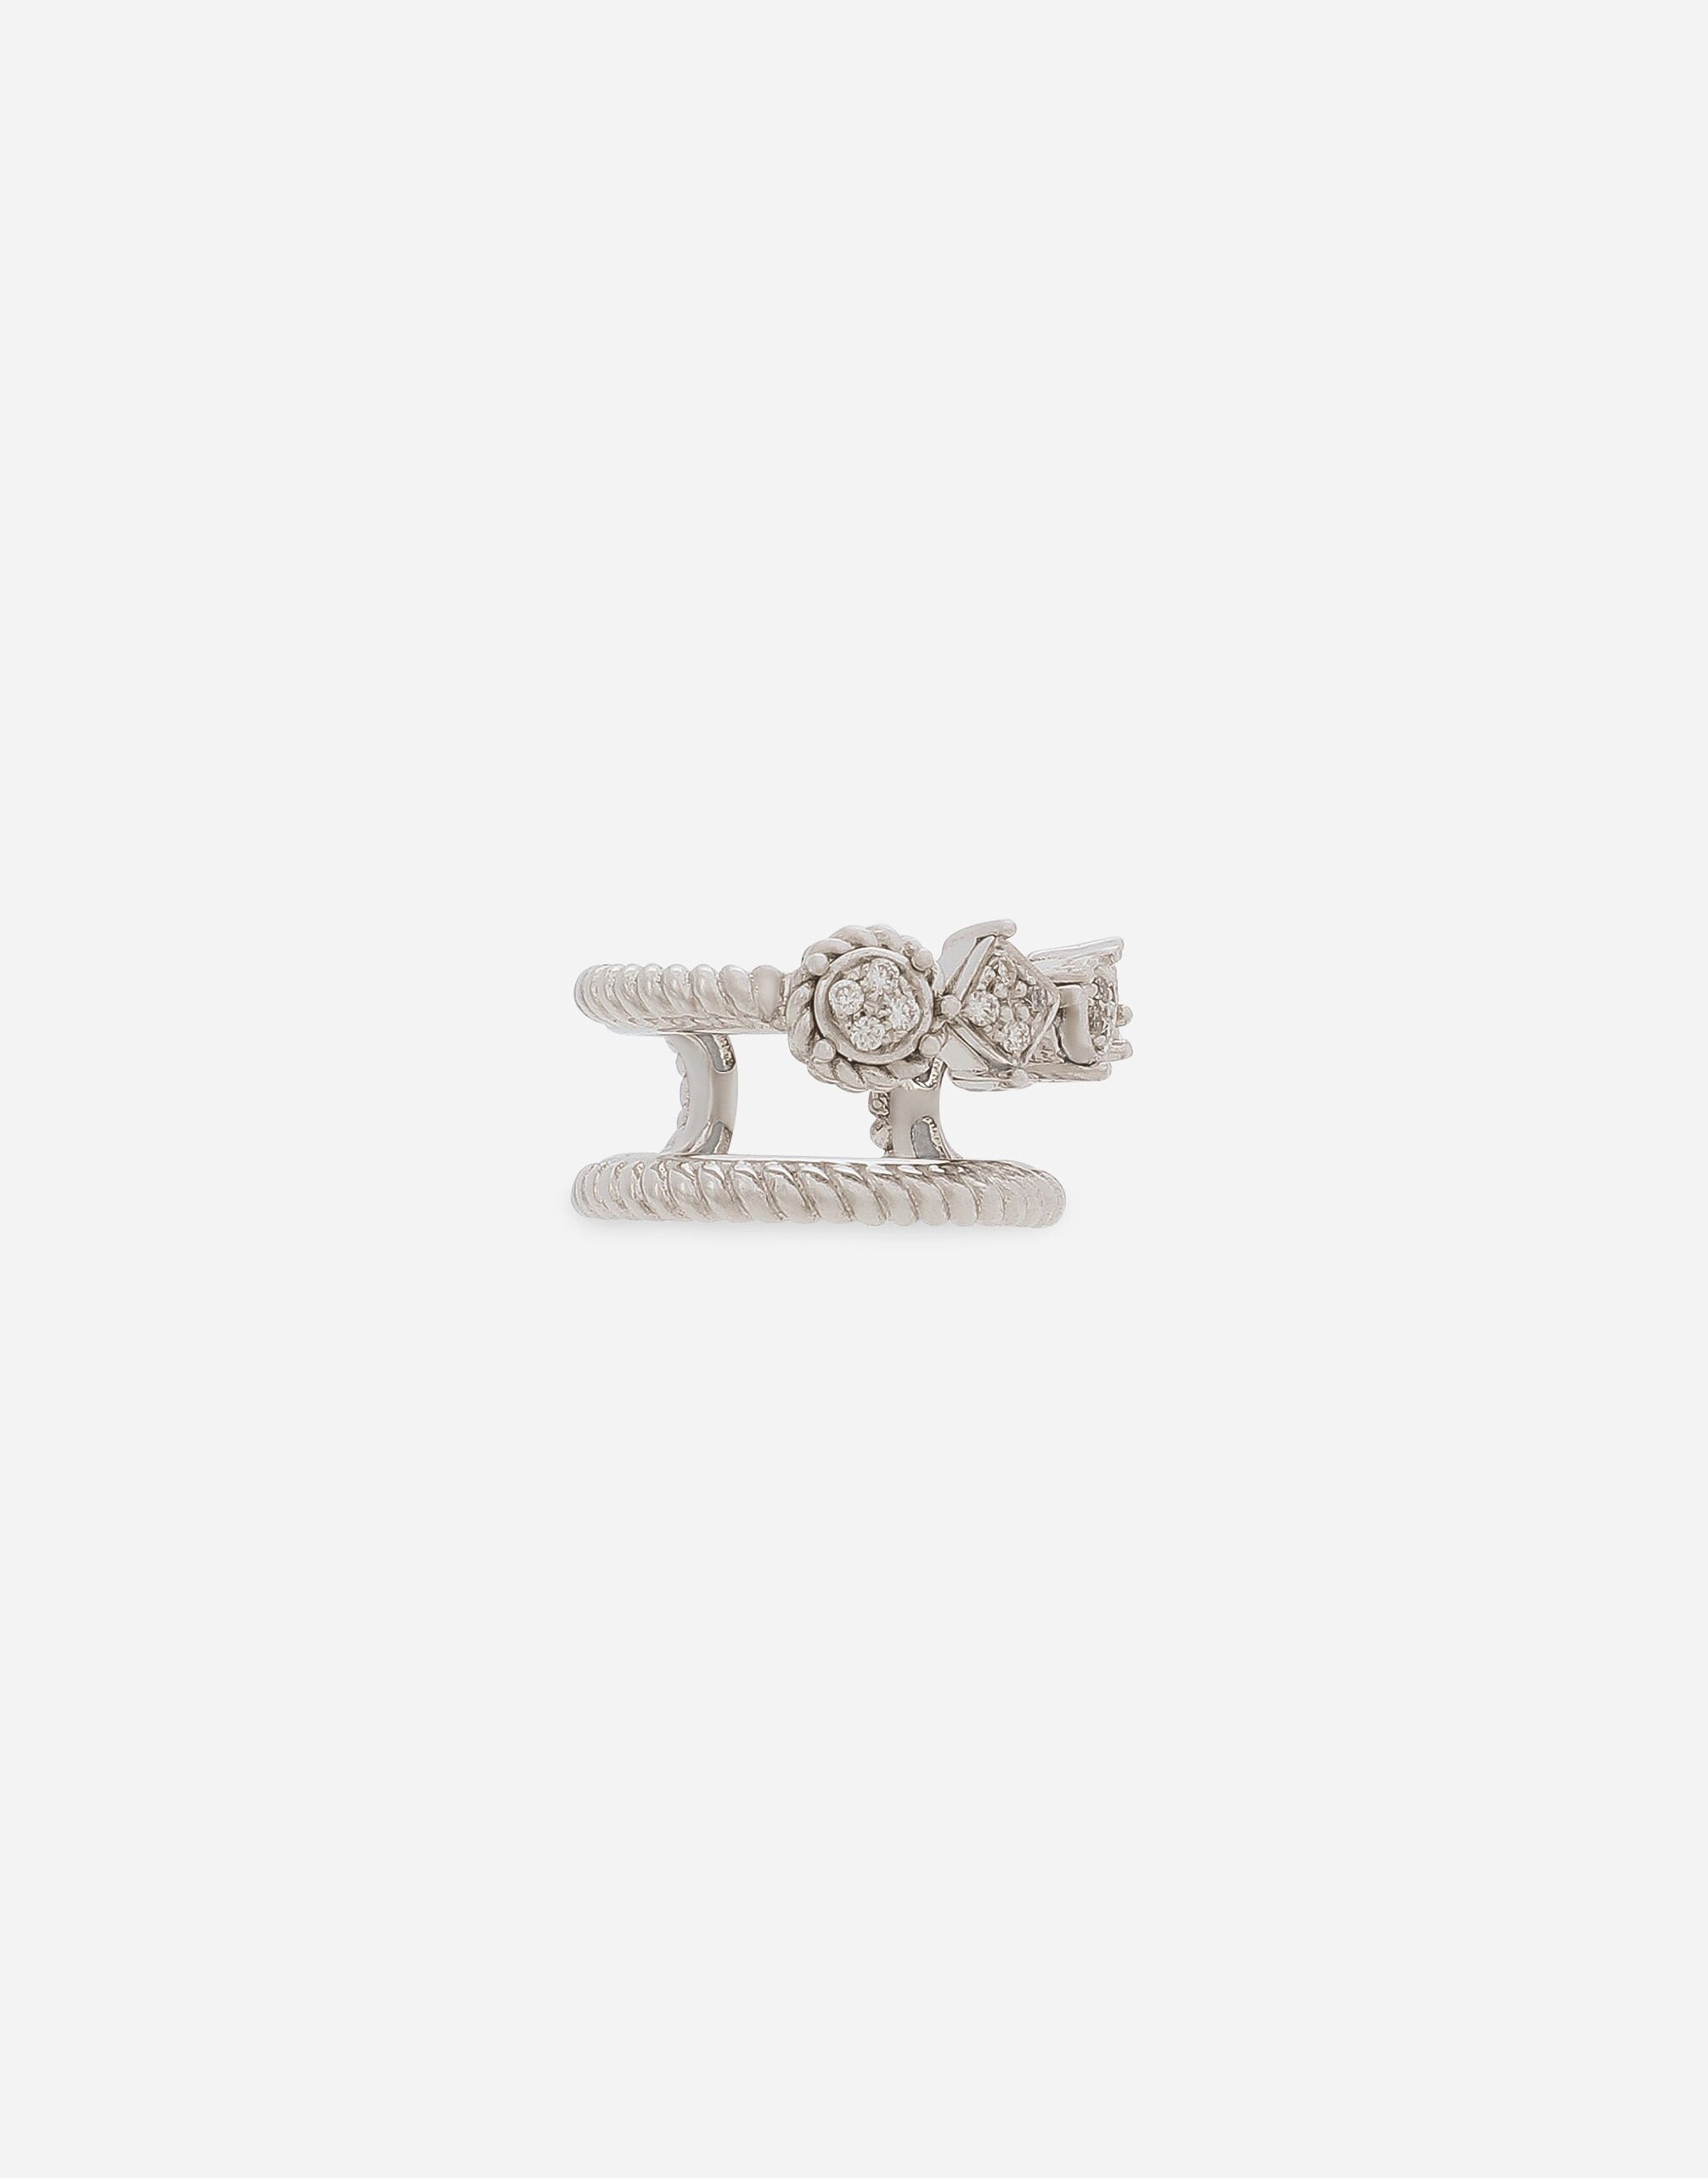 ${brand} Single earring double earcuff in white gold 18k with diamond pavé ${colorDescription} ${masterID}